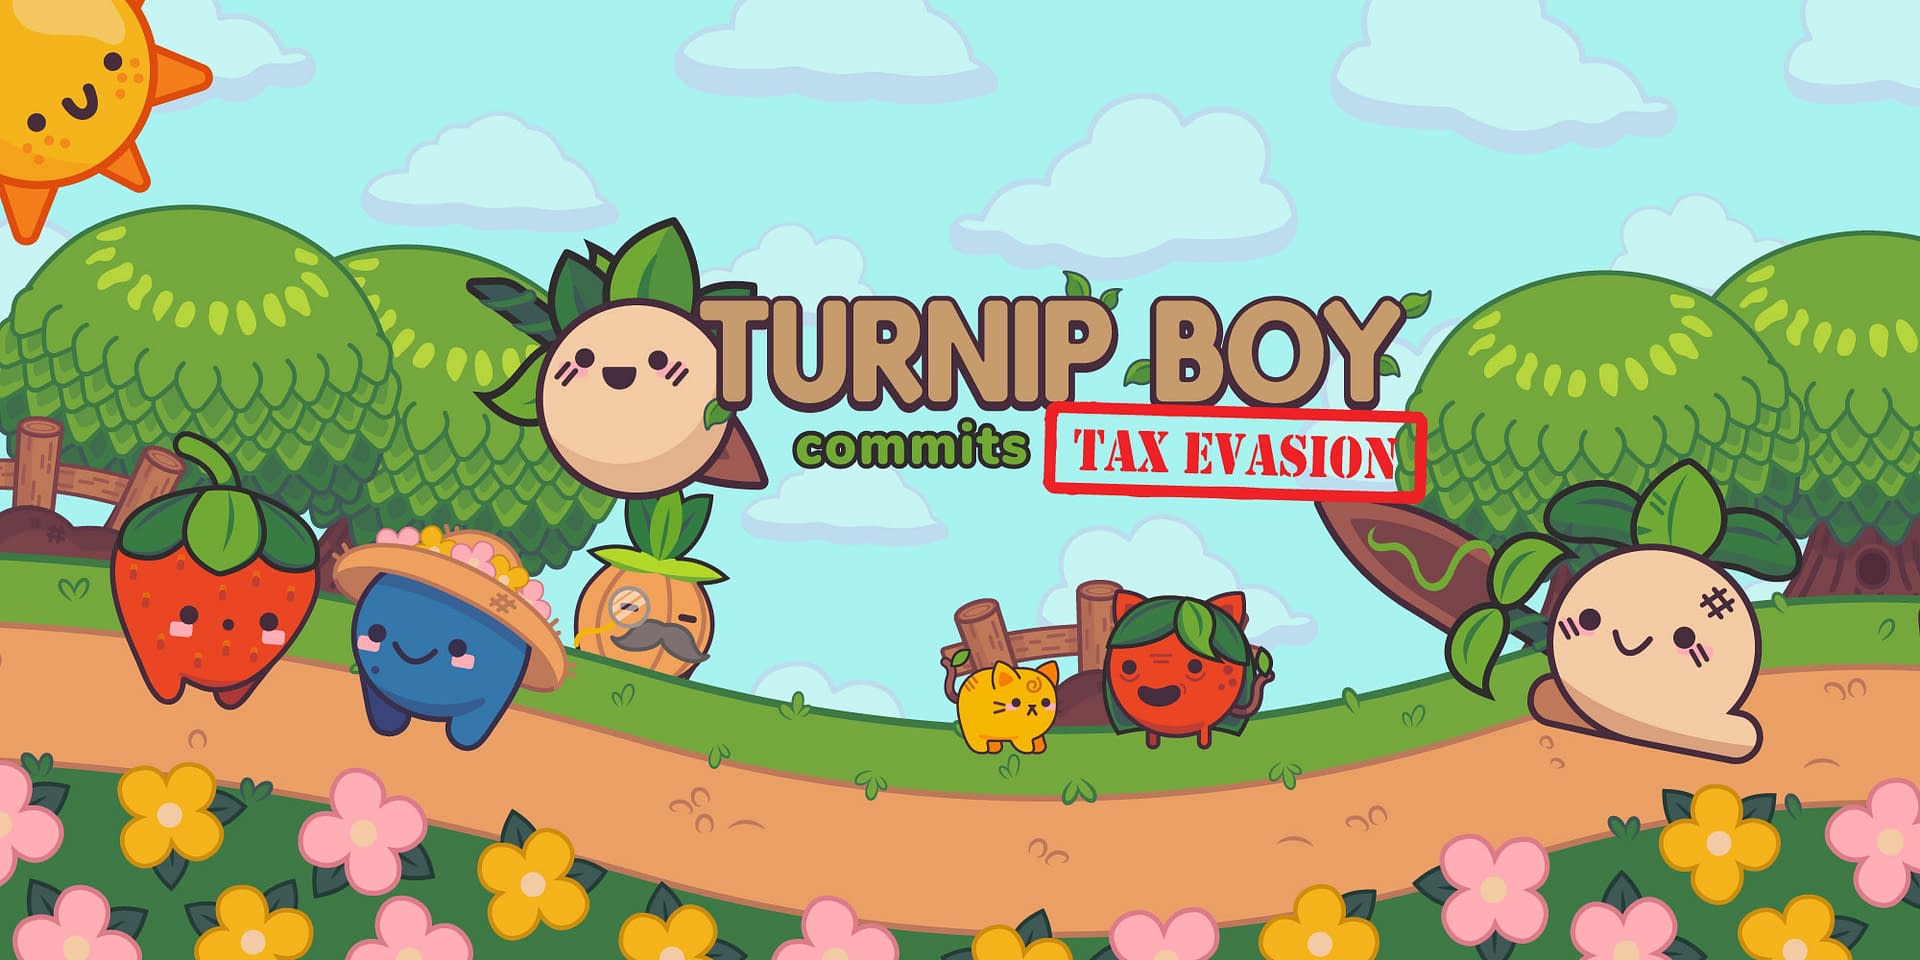 Coming Is To Turnip Mobile Boy Tax Commits Evasion